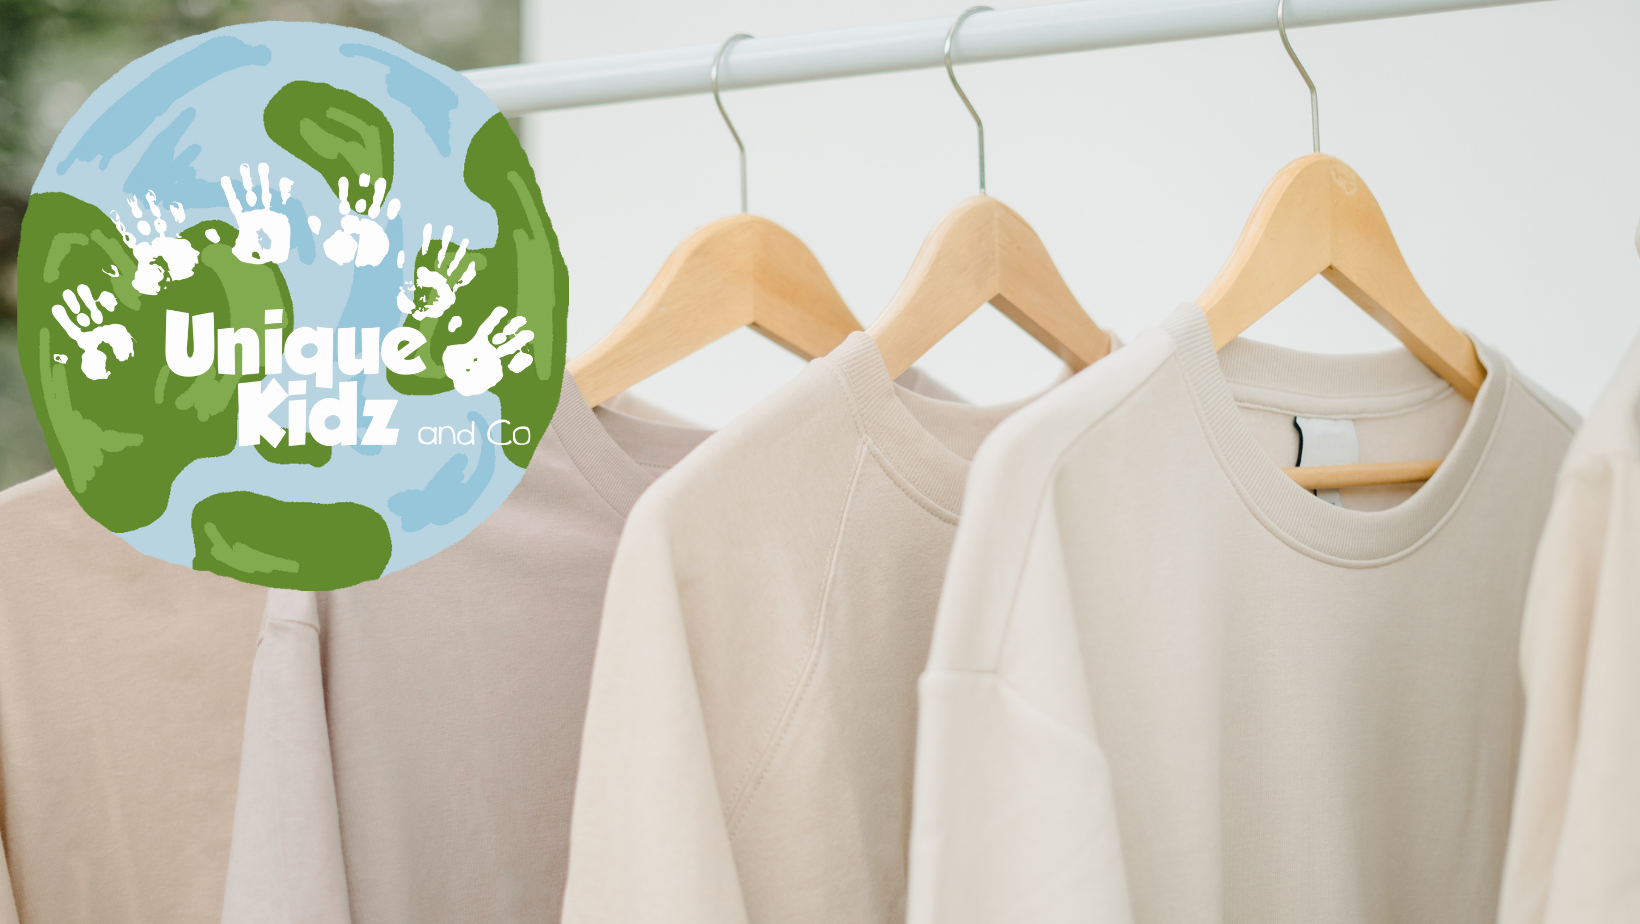 How Second Hand Clothing and Fashion Benefits the Environment